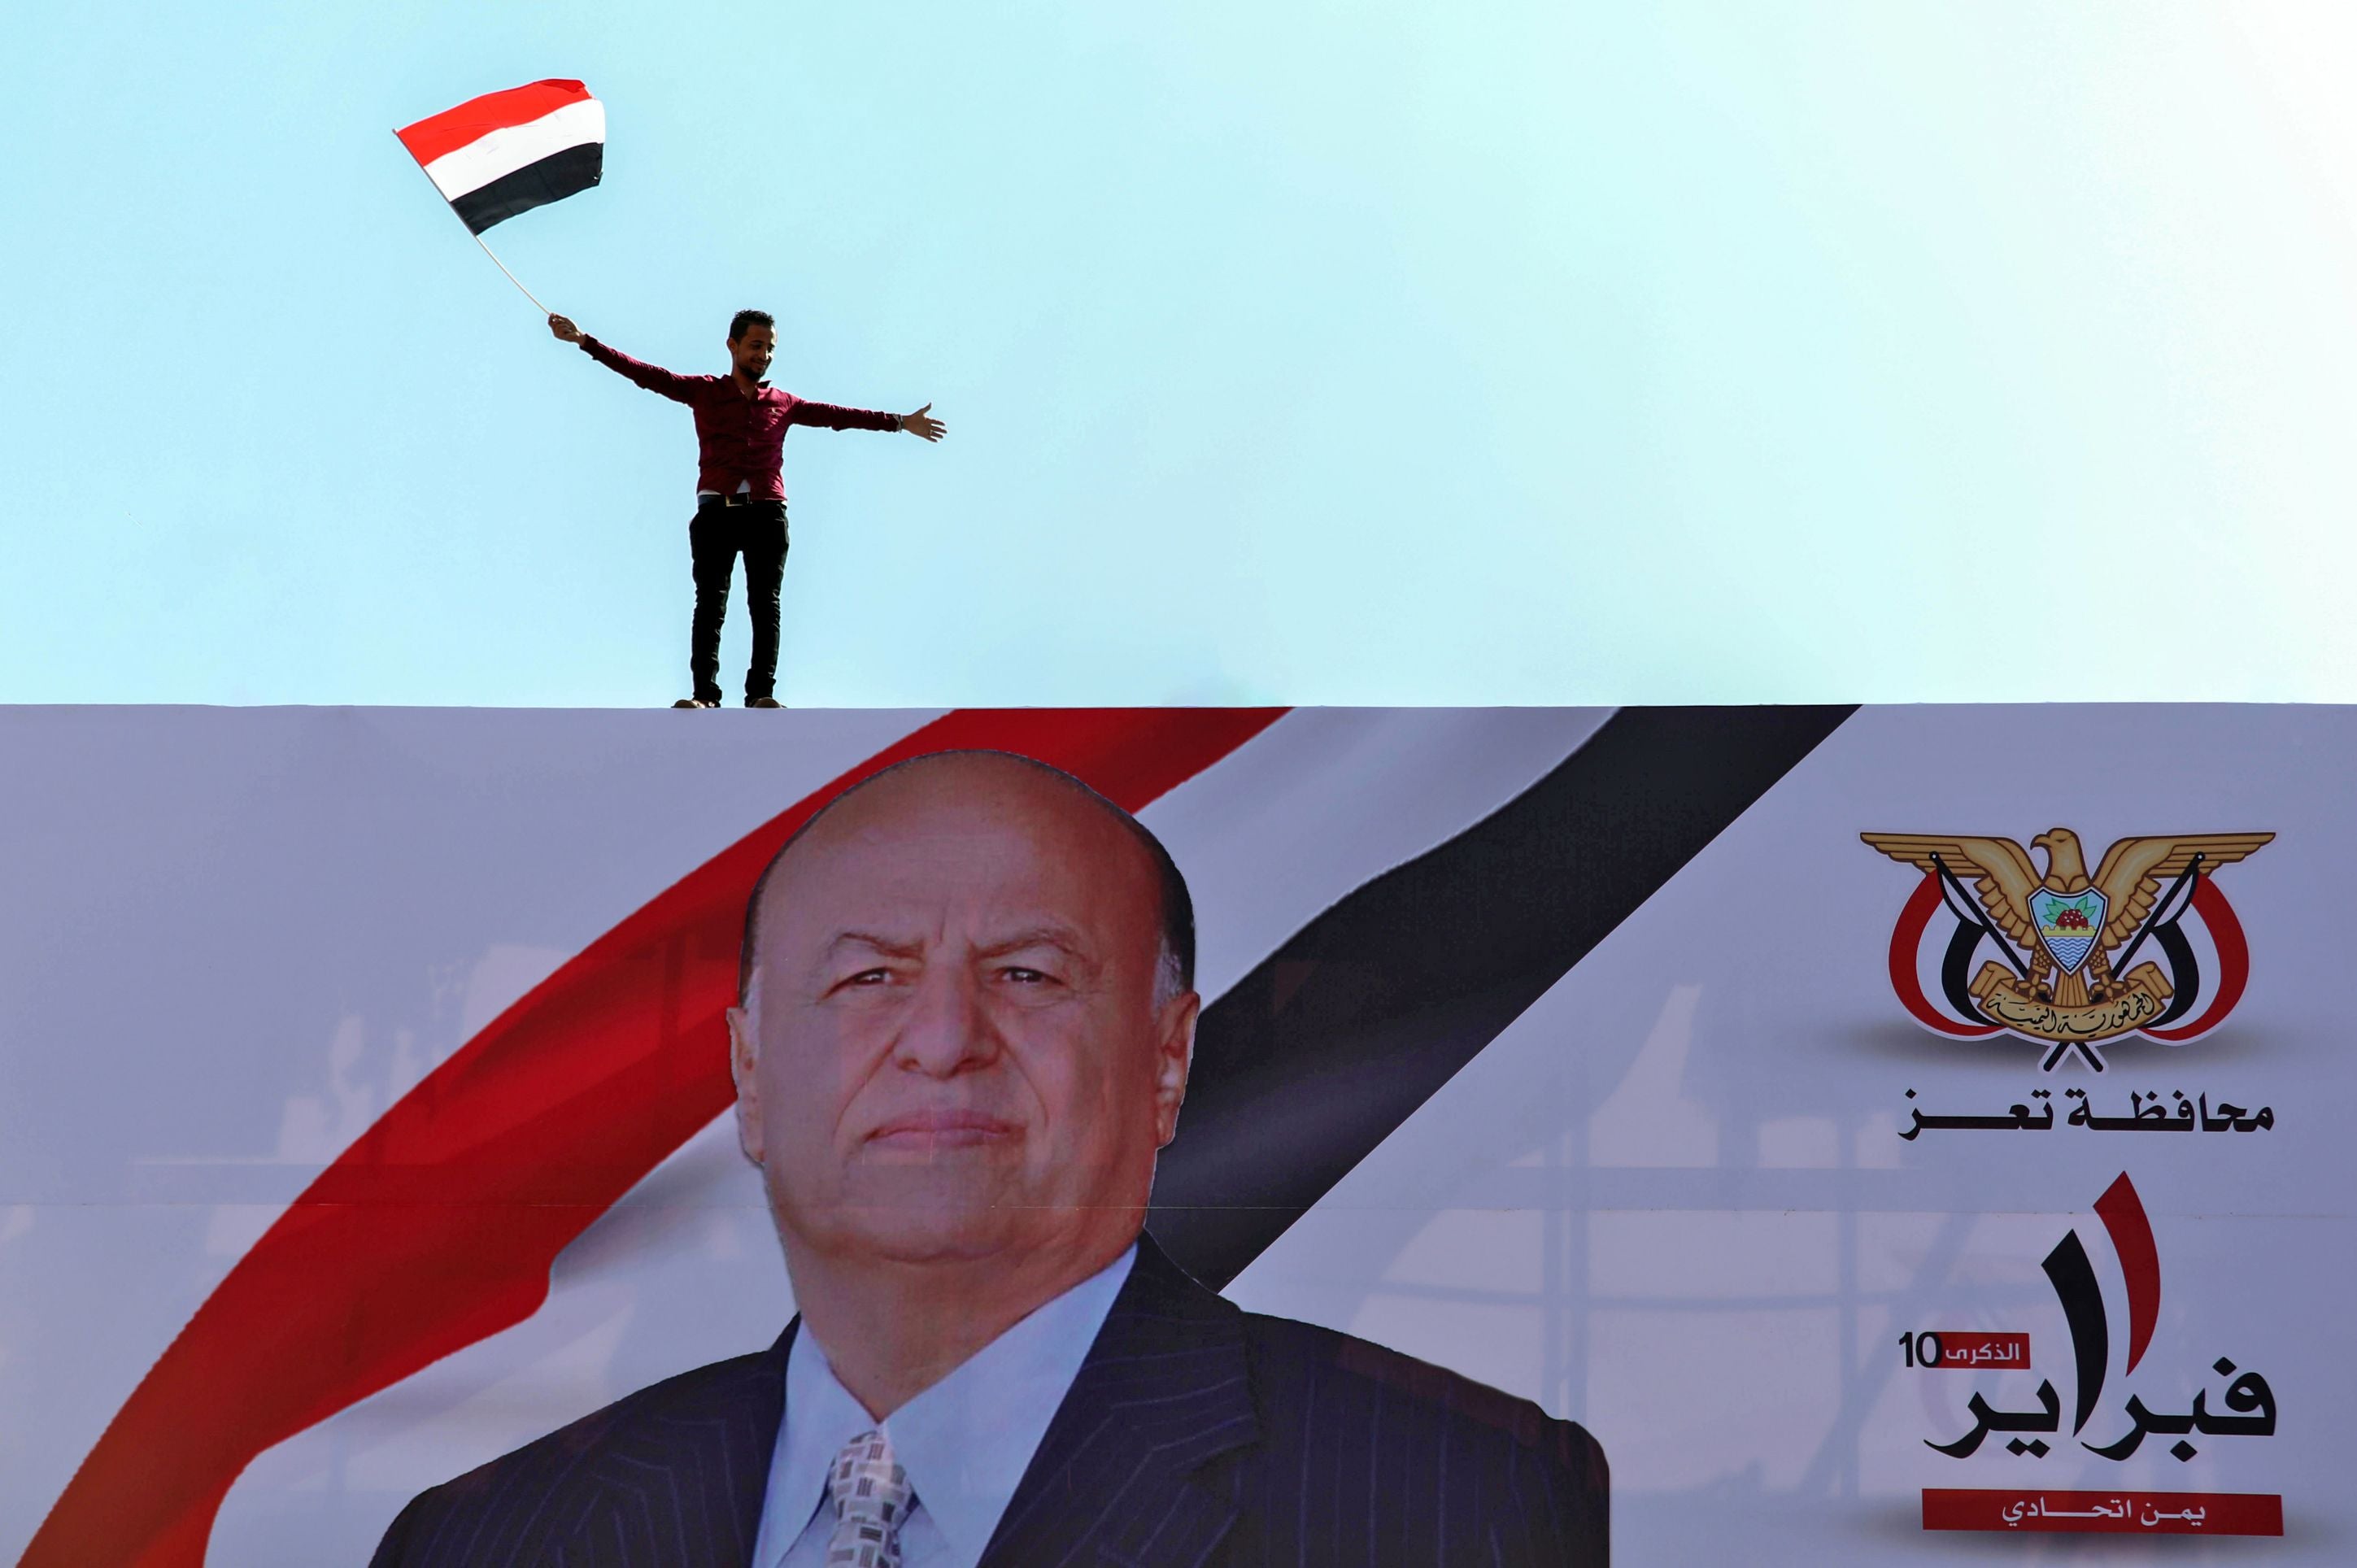 A Yemeni youth waves a national flag atop a billboard in Taez showing Yemen’s President Abedrabbo Mansour Hadi during a rally commemorating the 10th anniversary of the Arab Spring uprising